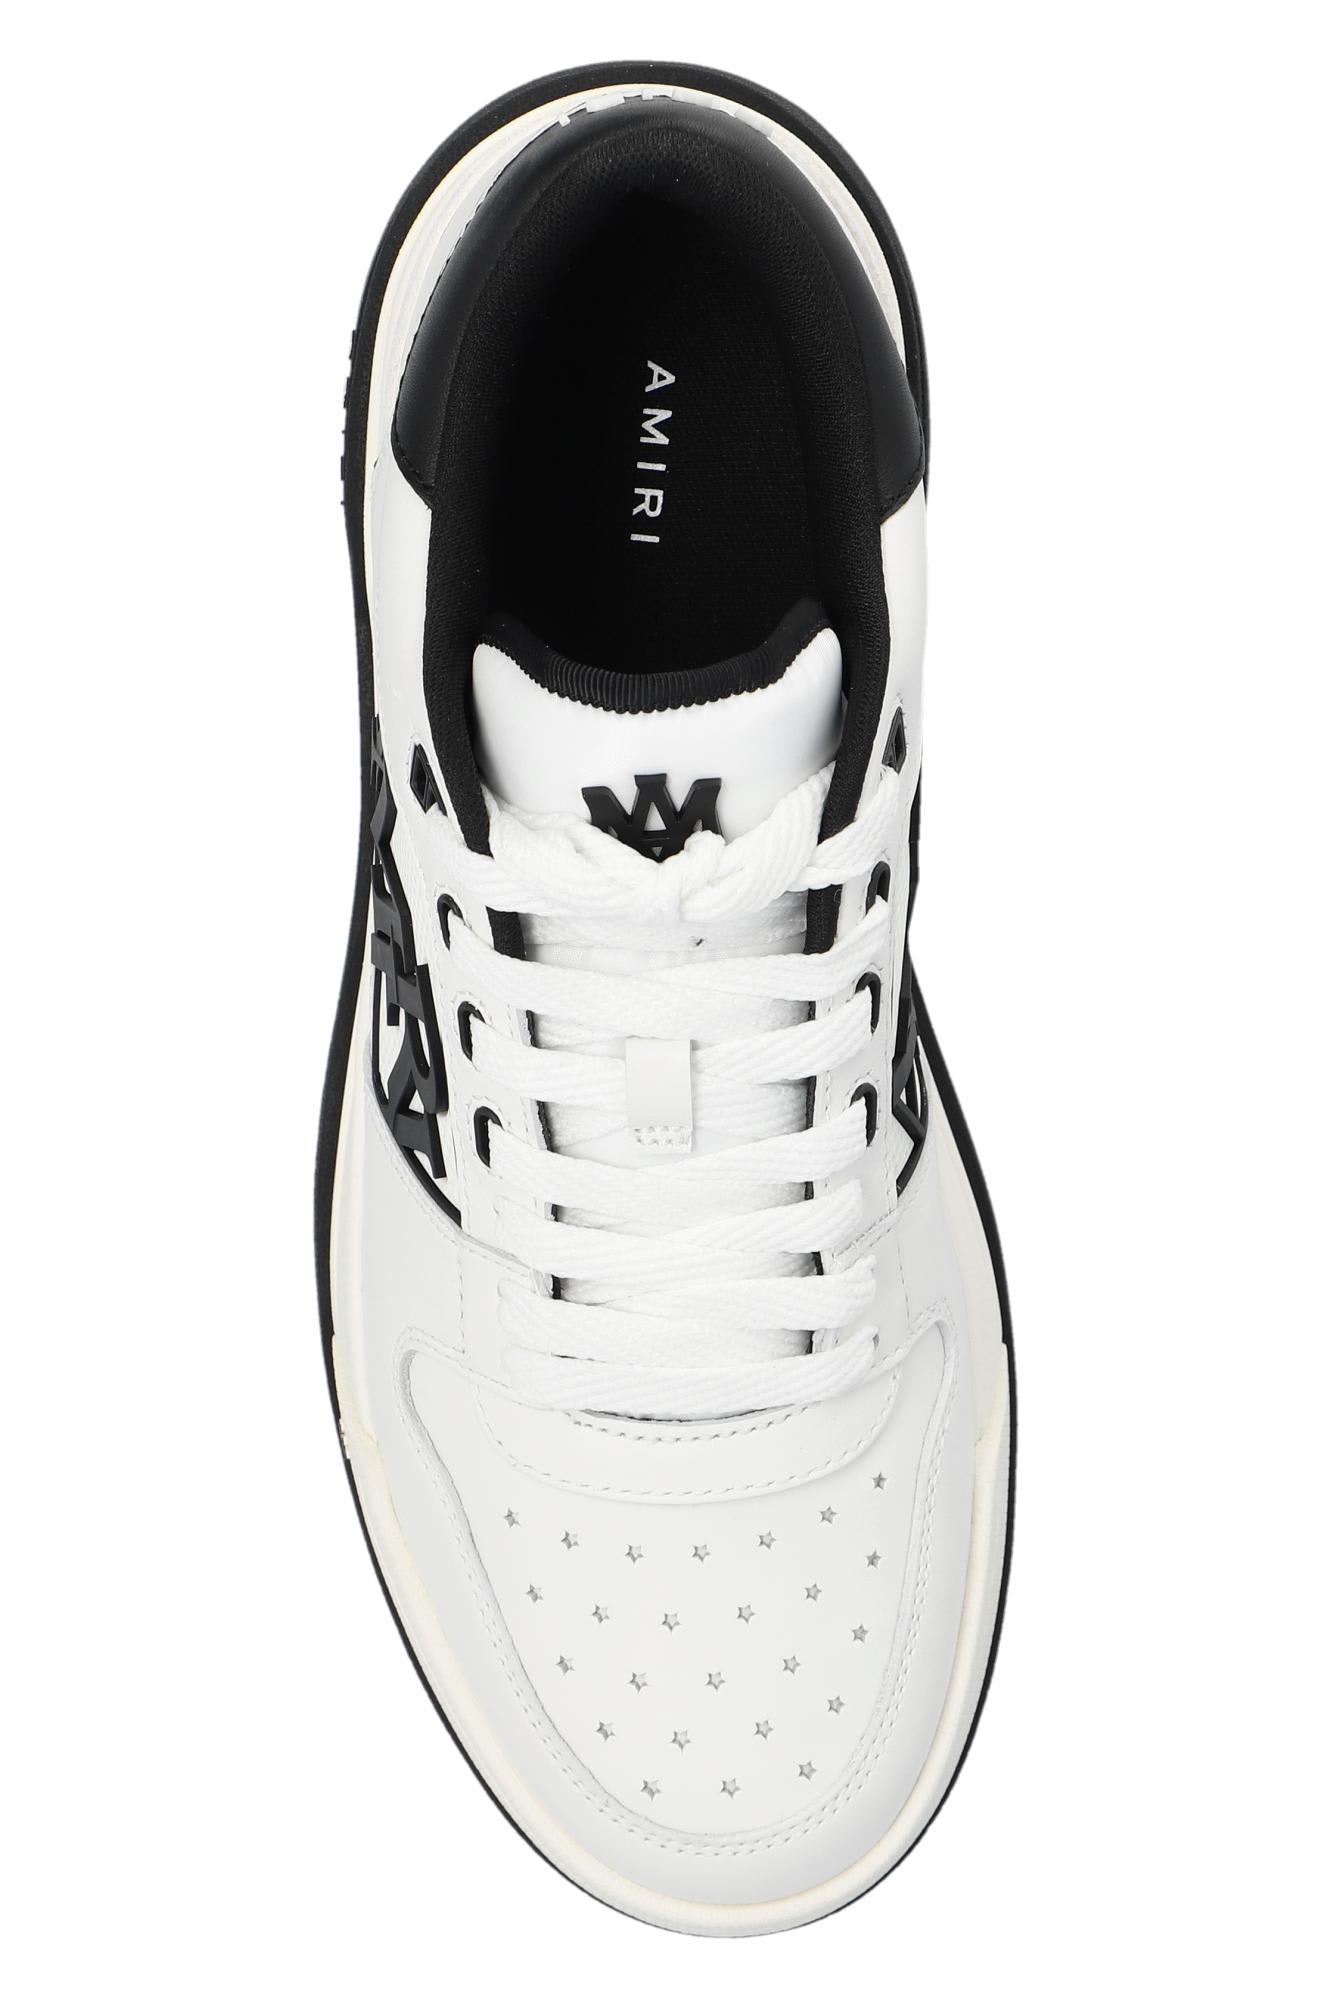 Shop Amiri Classic Low Top Sneakers In White